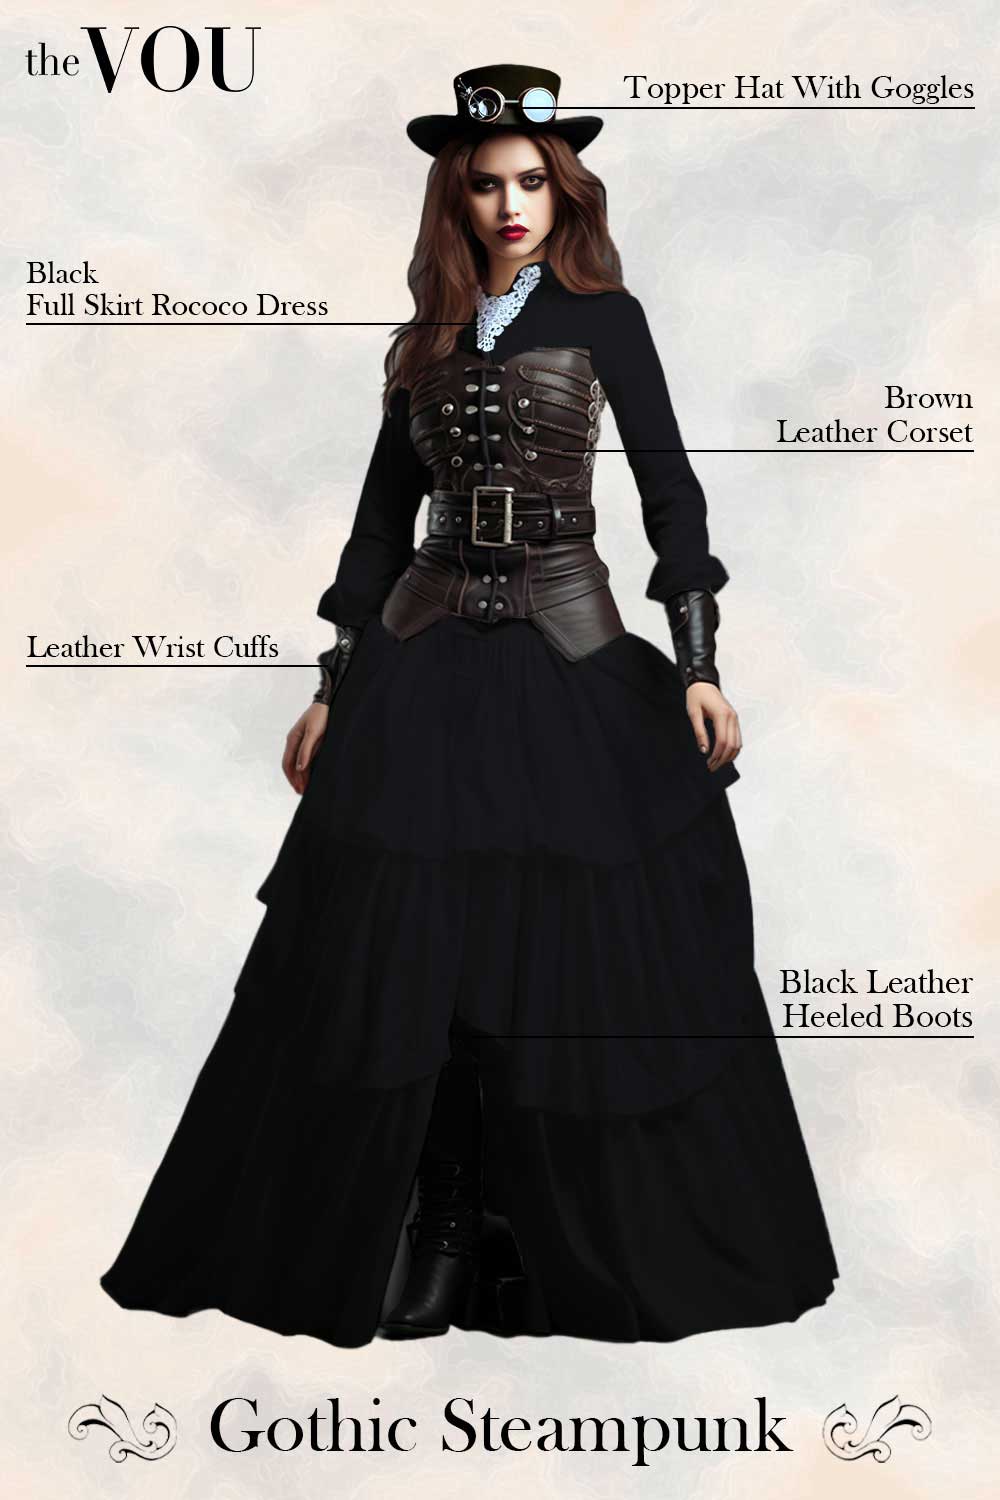 Gothic Steampunk style outfit